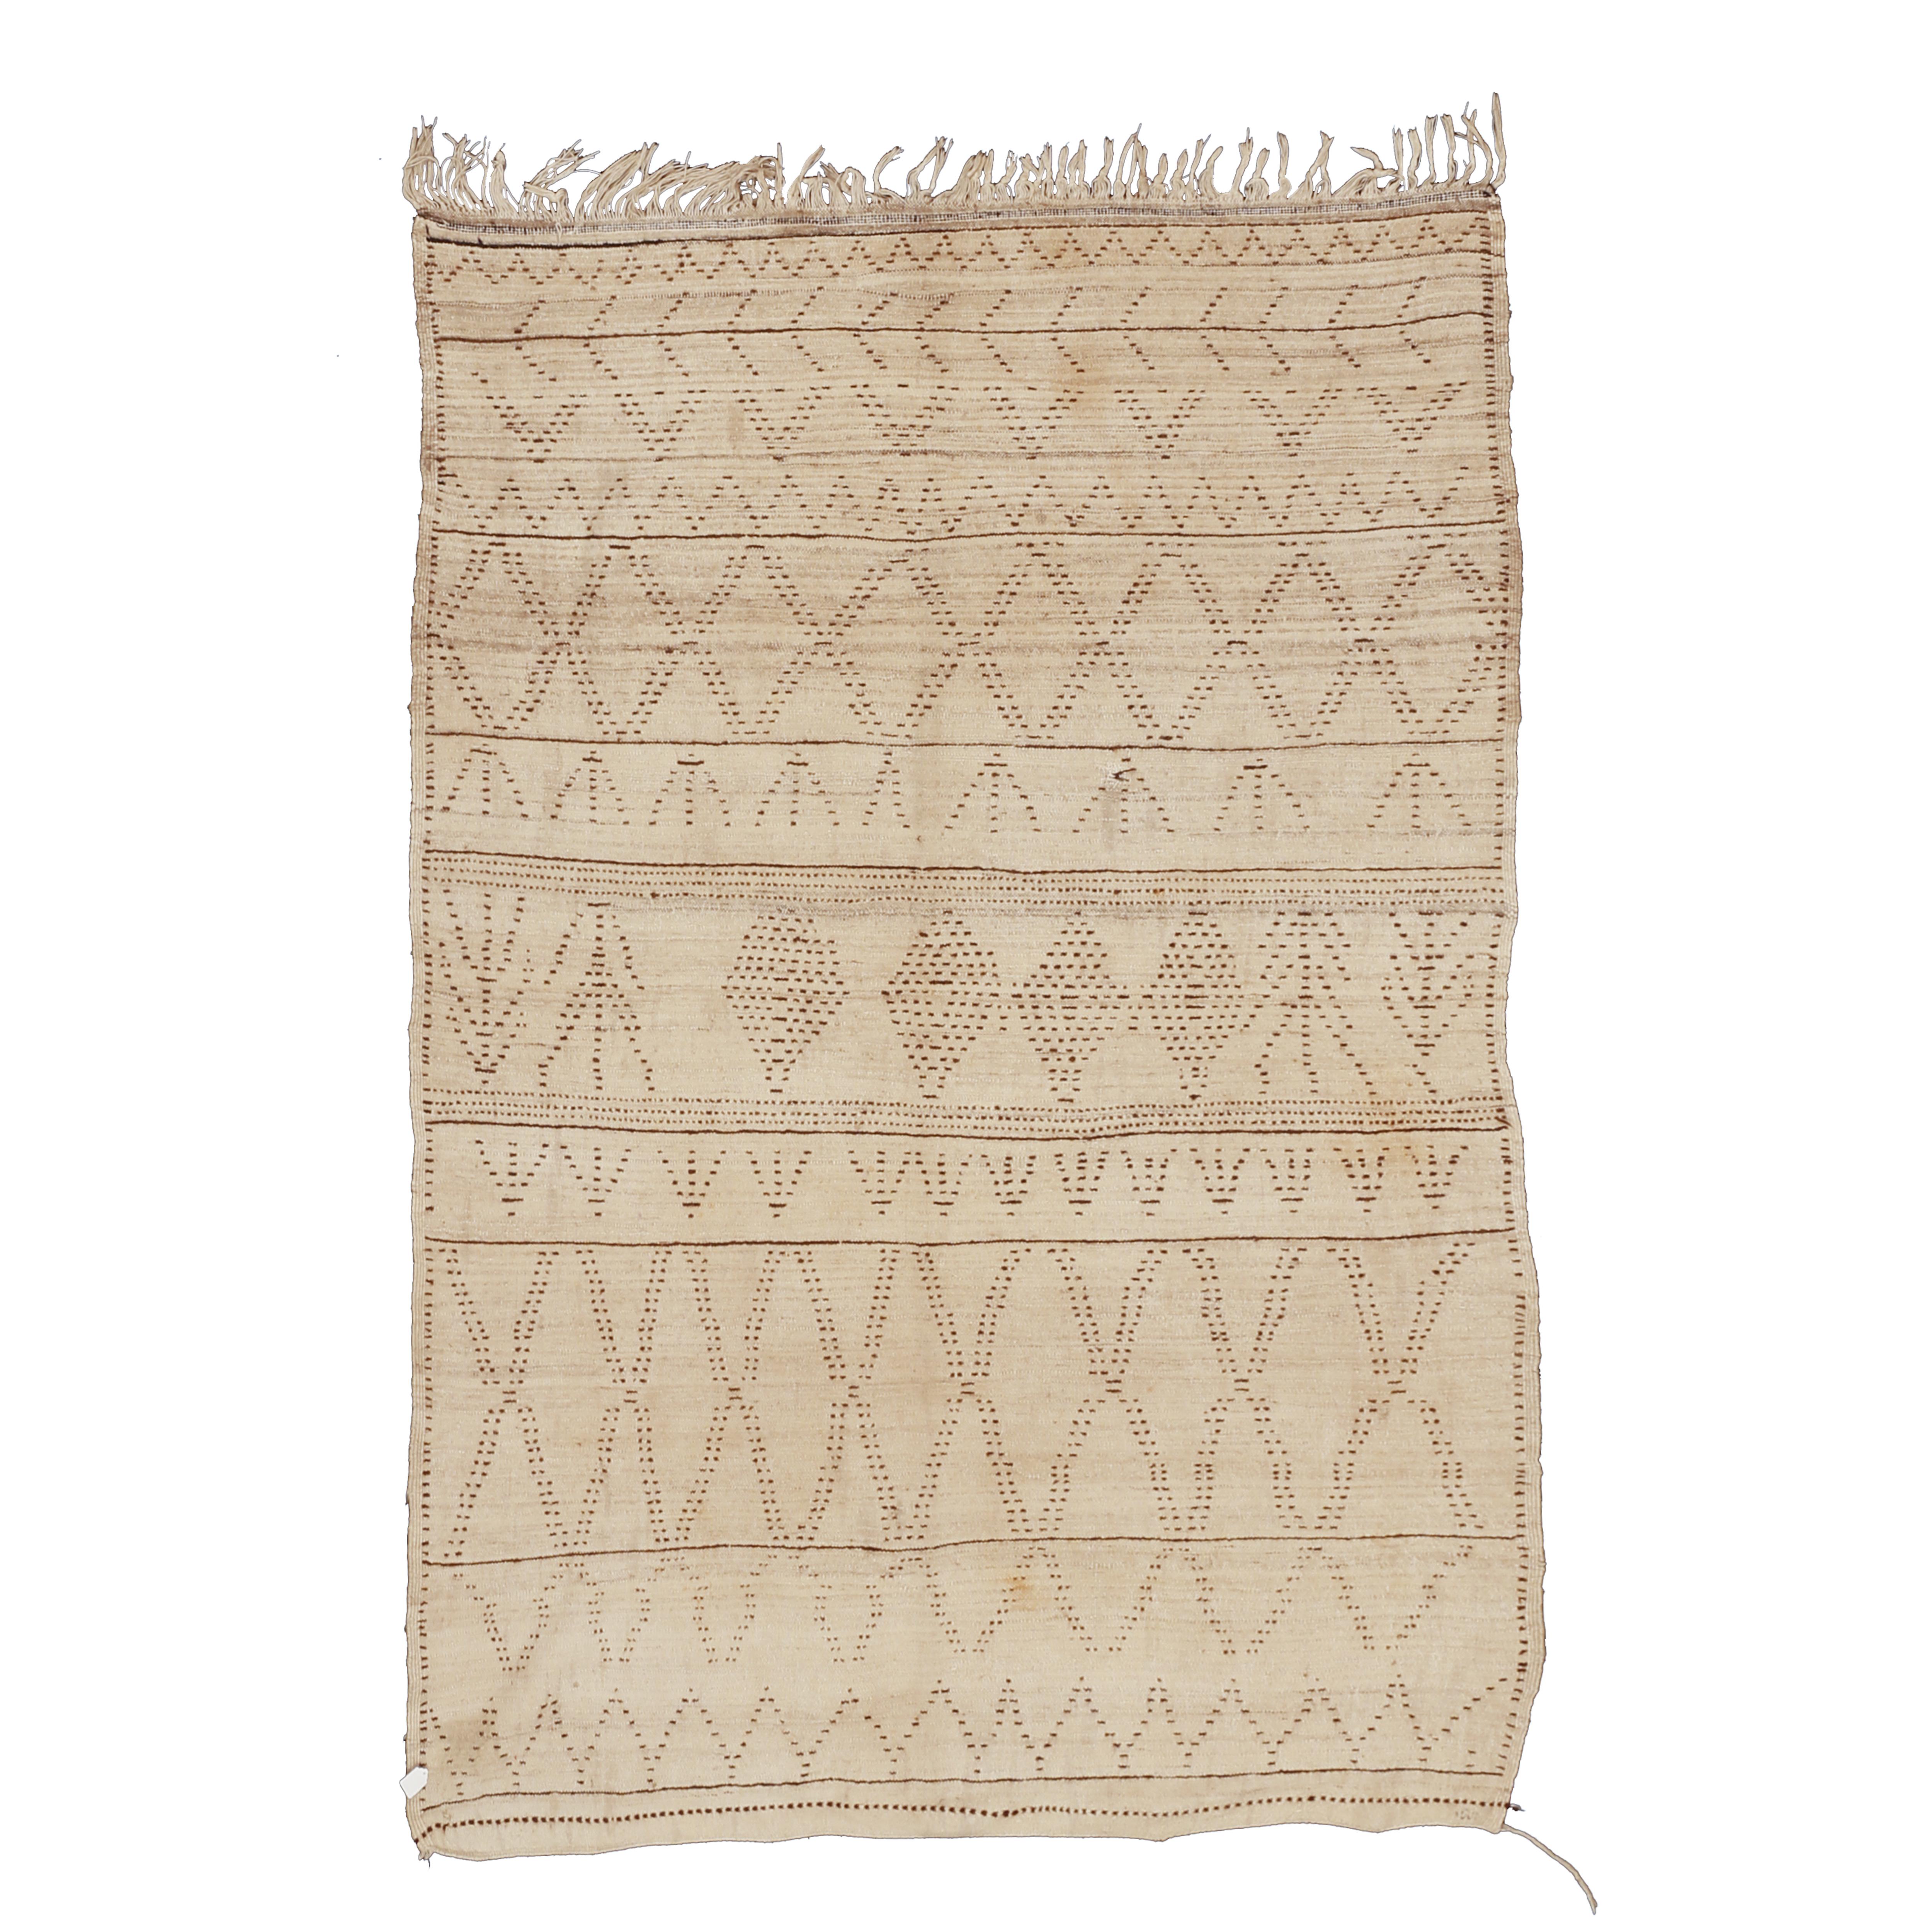 Woven with natural, undyed wool, this rug belongs to the earliest group of Azilal weavings and the first ones to appear on the market around the turn of the Millennium. Azilal rugs share some design features with some of the ivory ground weavings